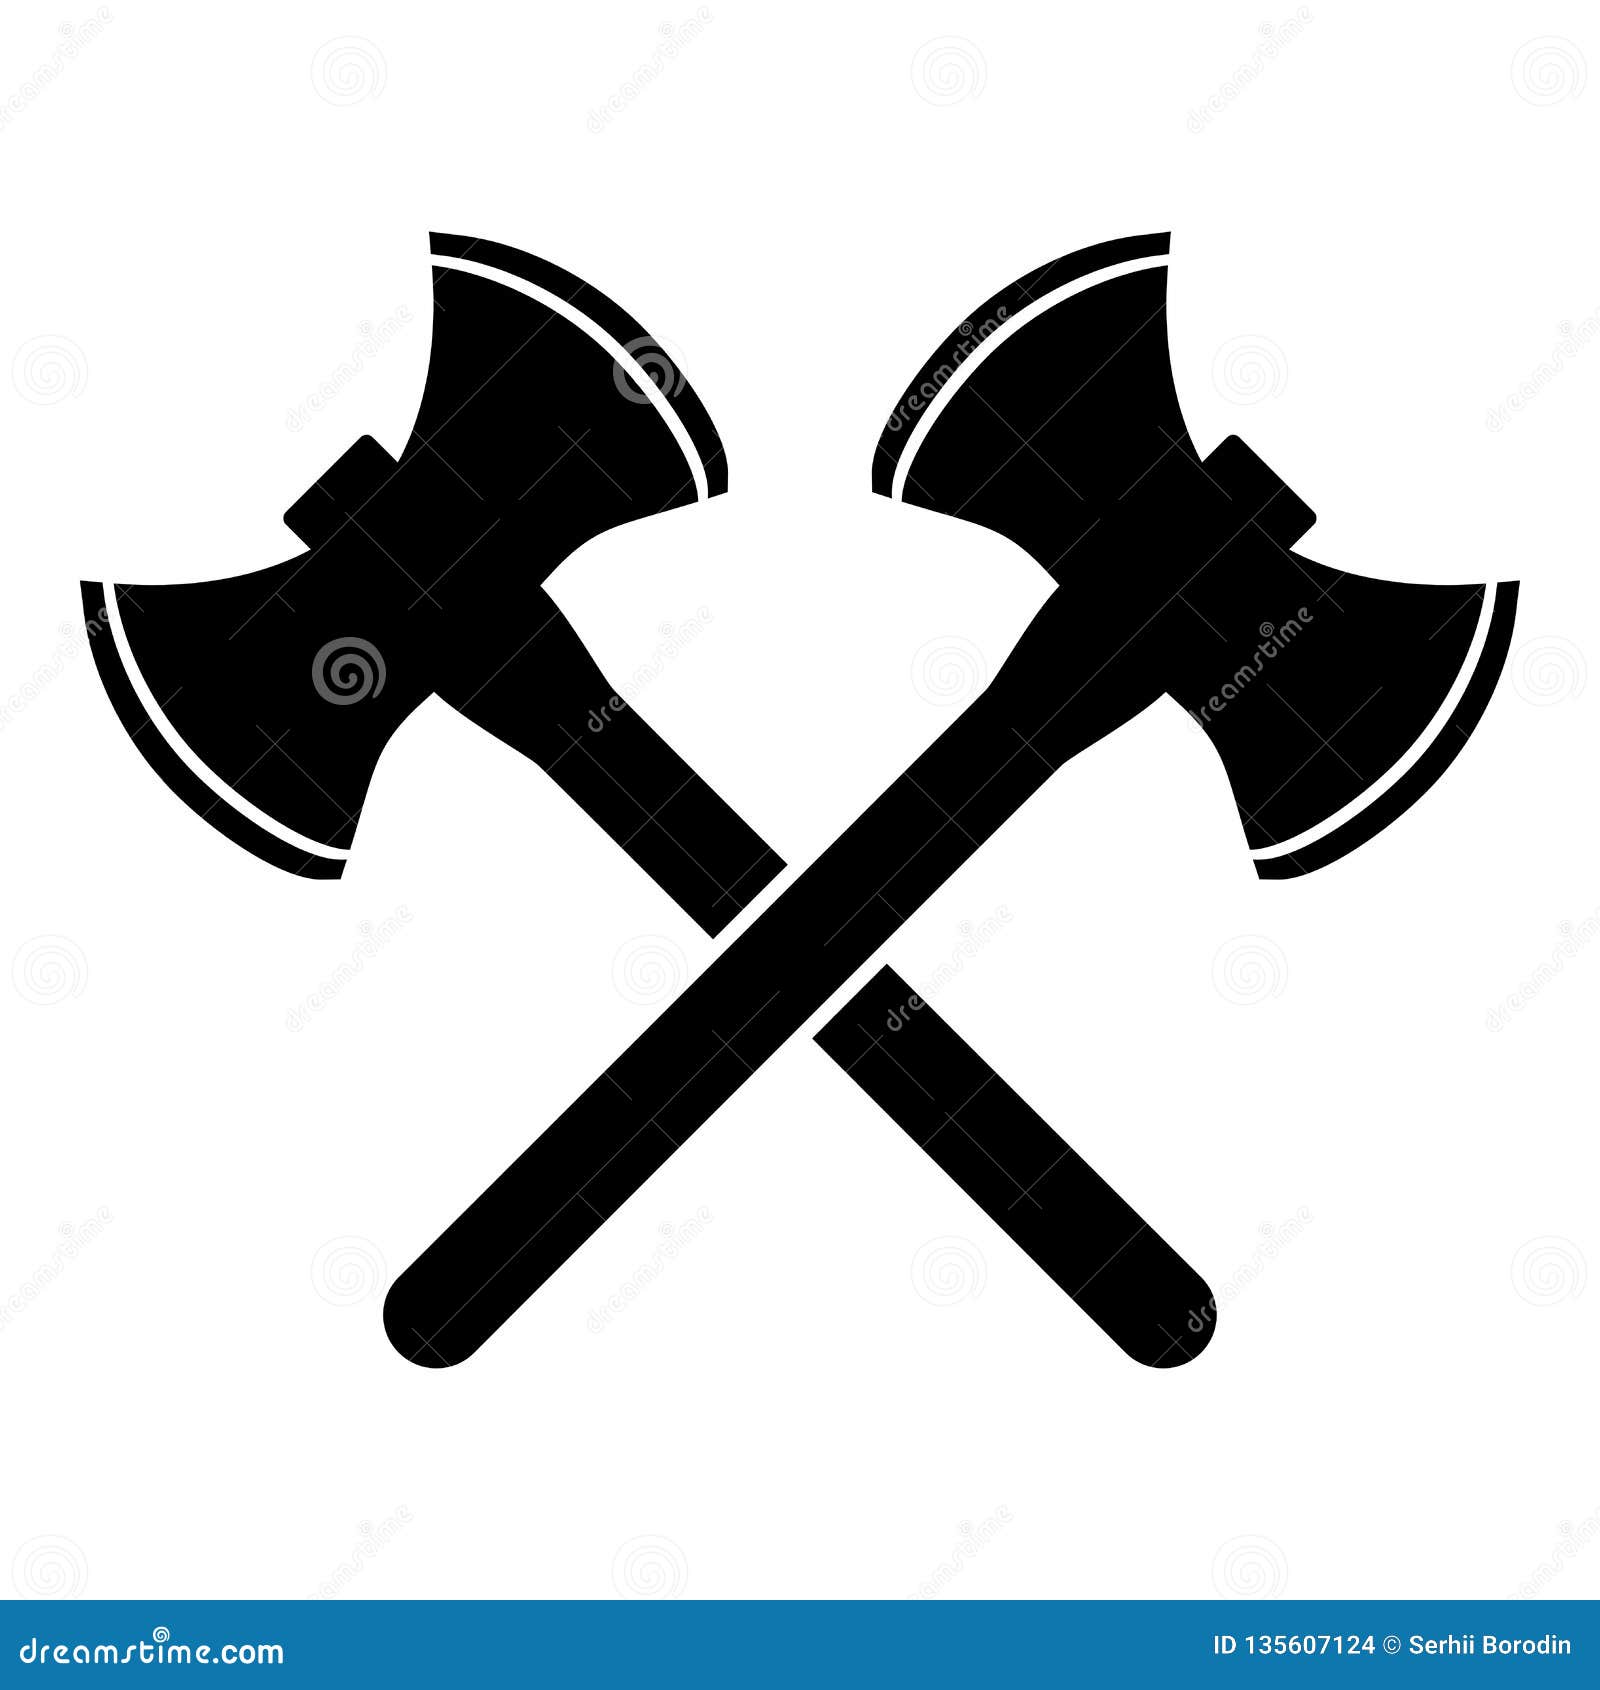 Double Sided Axe Stock Illustrations 52 Double Sided Axe Stock Illustrations Vectors Clipart Dreamstime